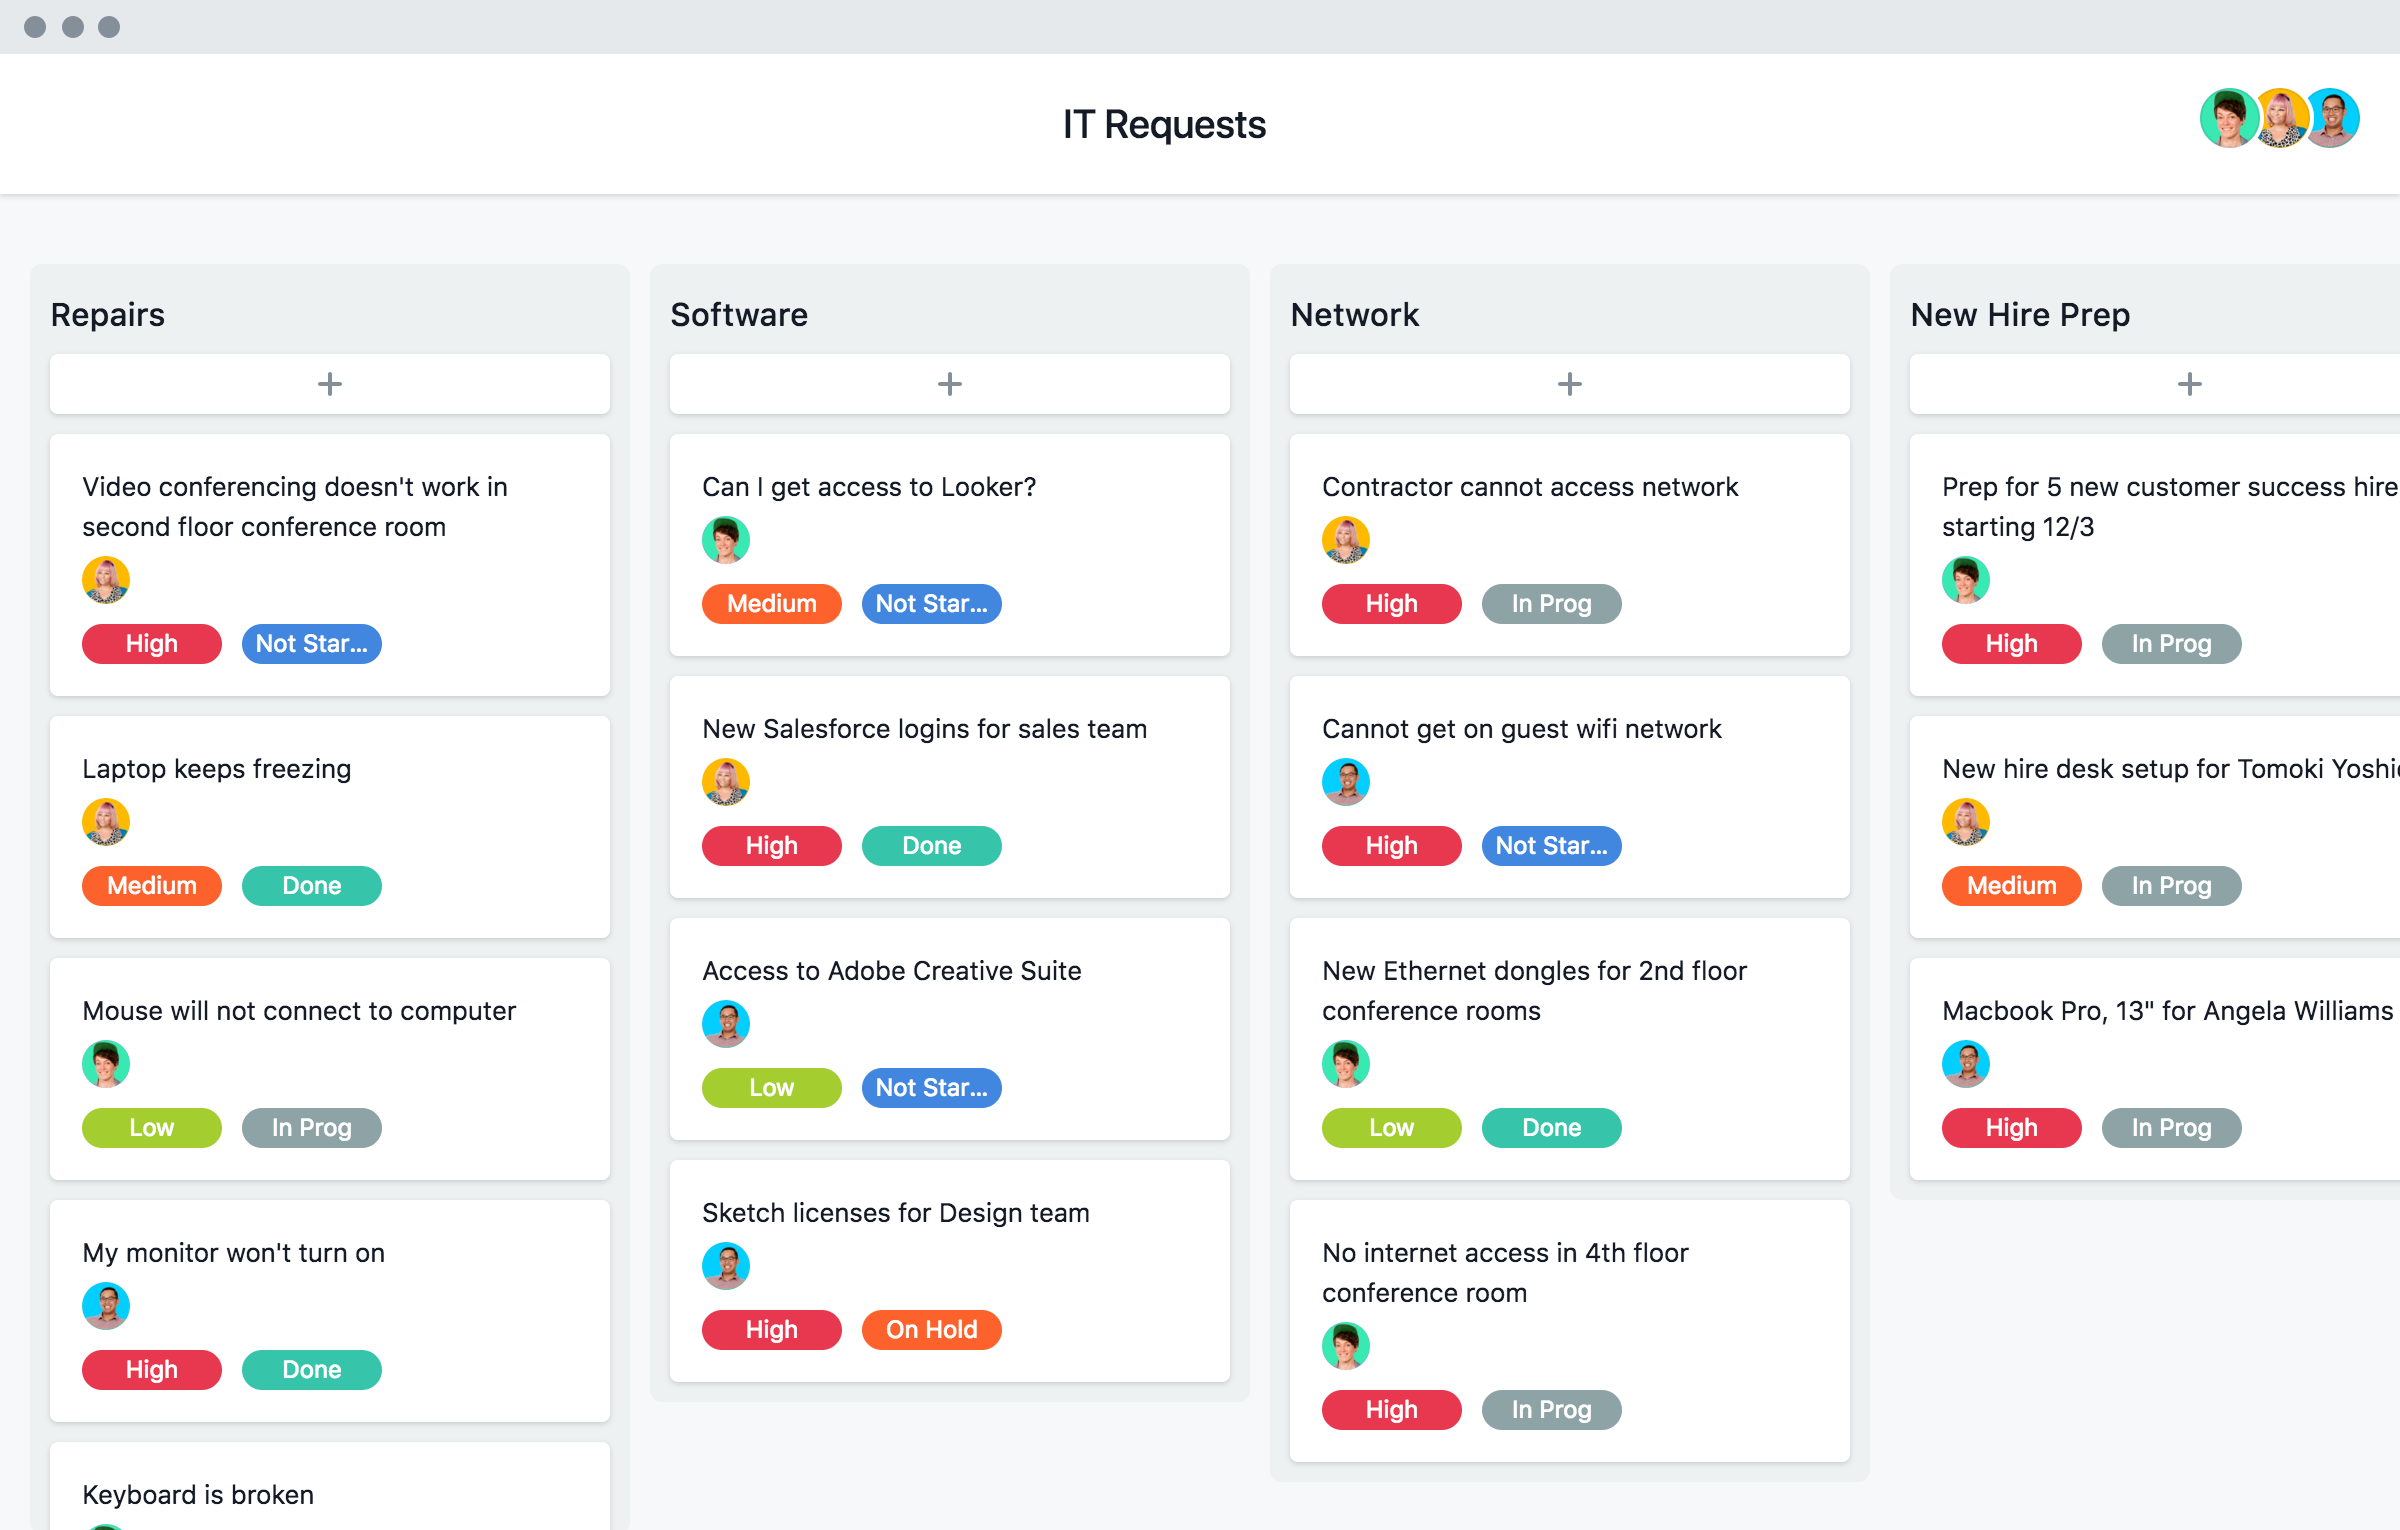 [Old product ui] IT requests project in Asana, Kanban style project view (Boards)